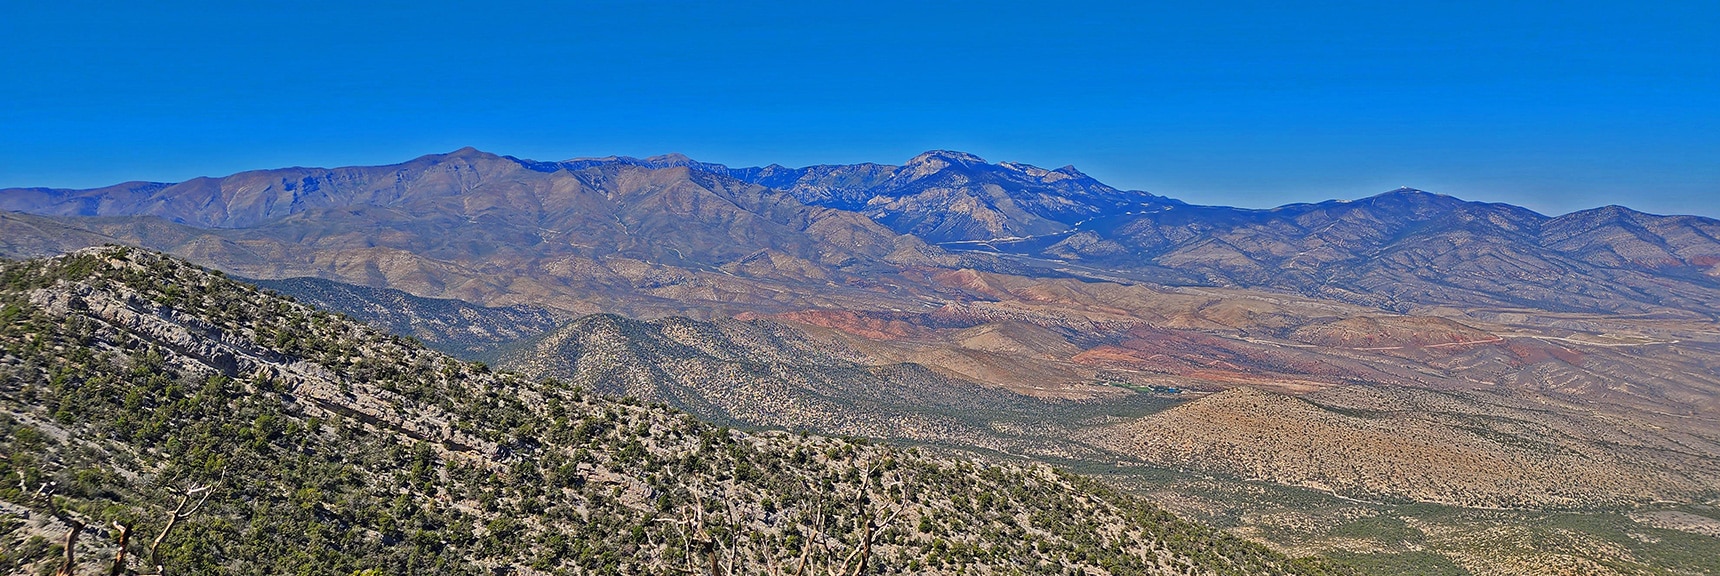 Mt. Charleston Wilderness and Kyle Canyon from Burnt Peak Summit | Kyle Canyon Grand Crossing | Northern Half | La Madre Mountains Wilderness, Nevada